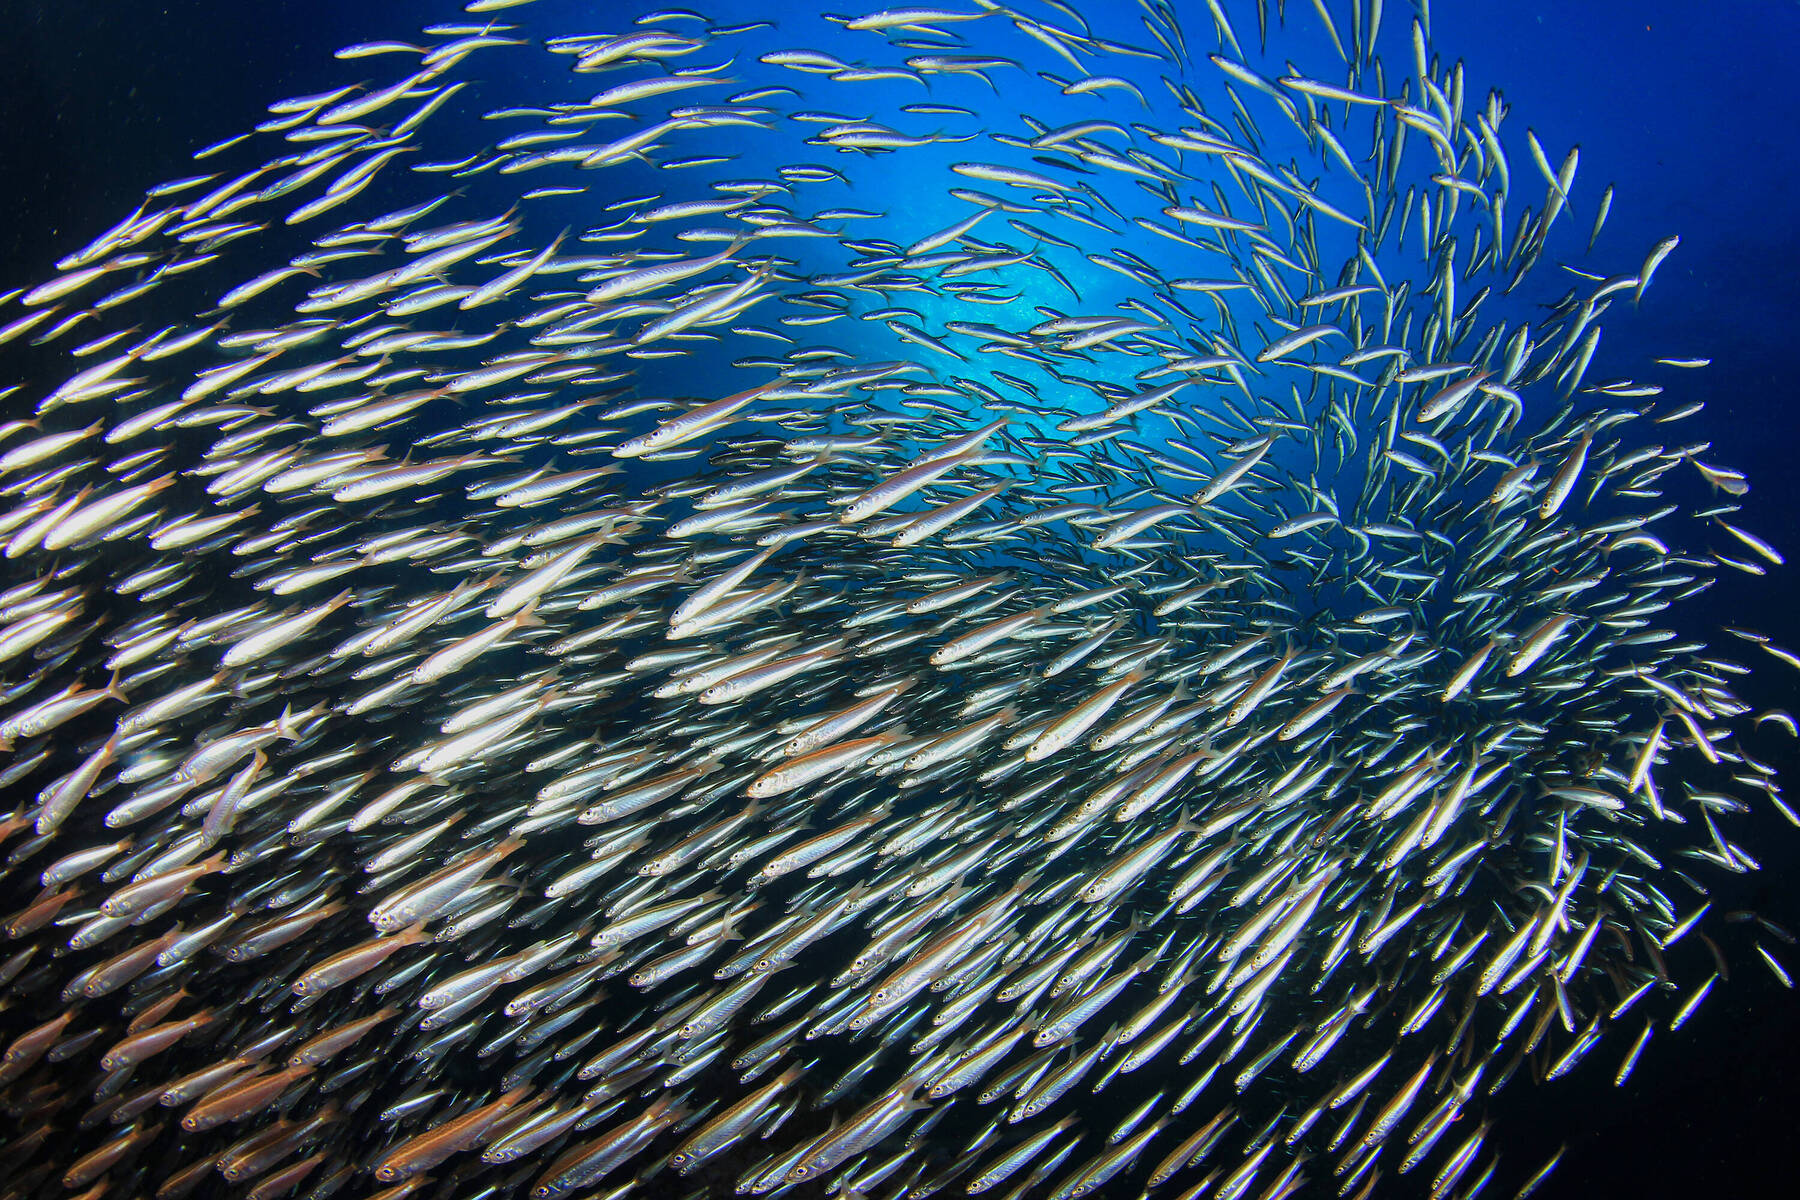 Swimming with a million shimmering silver sardines